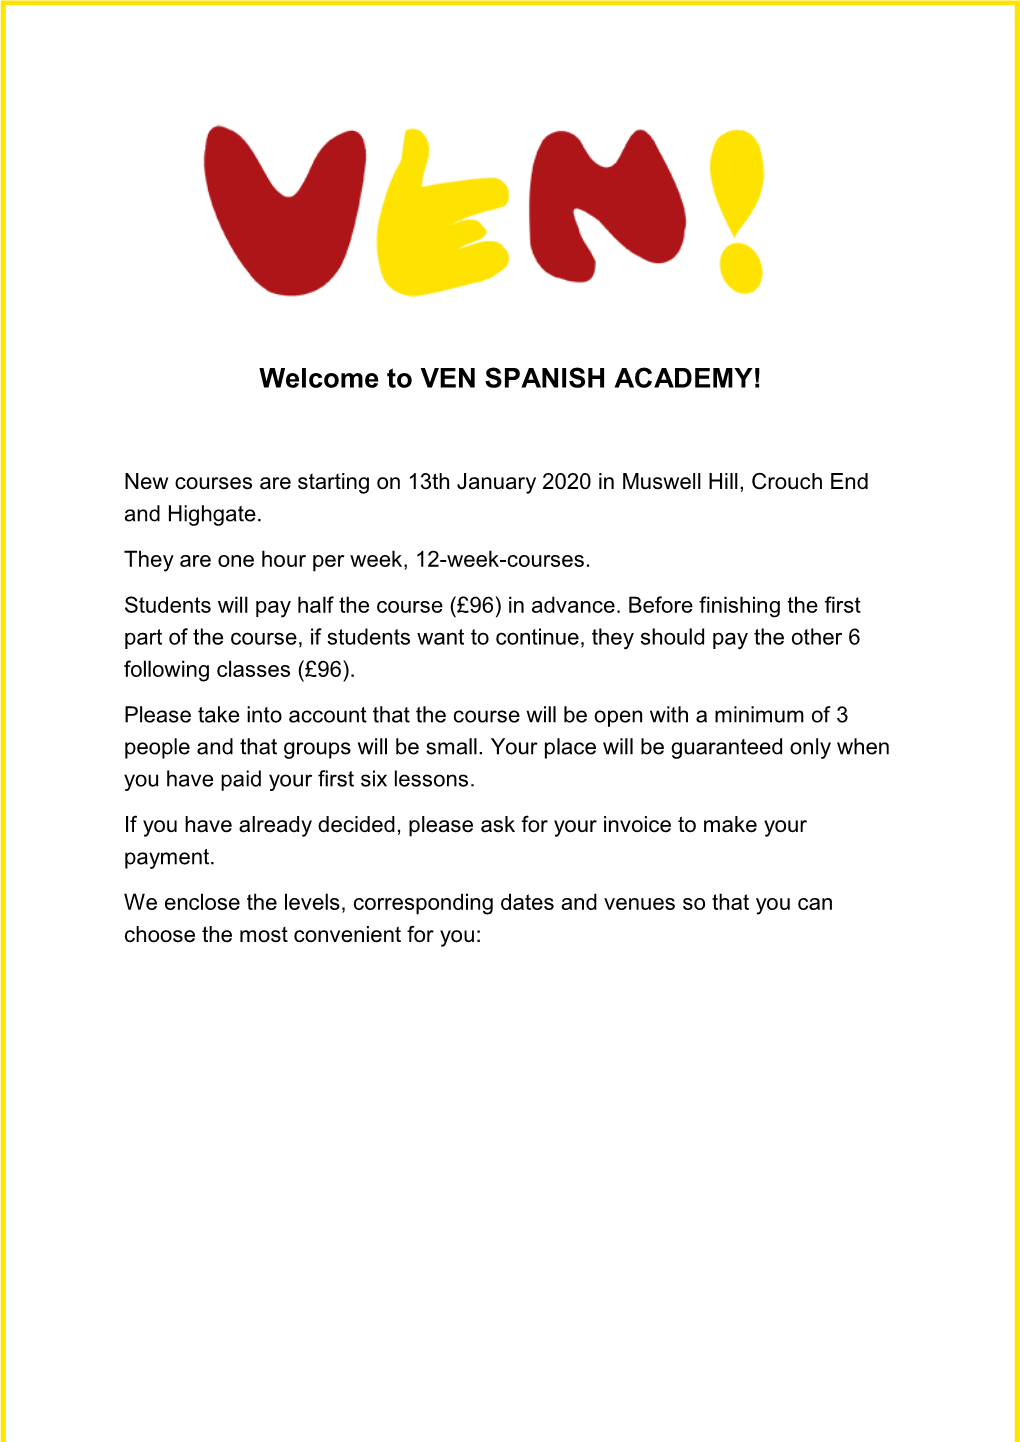 Welcome to VEN SPANISH ACADEMY!